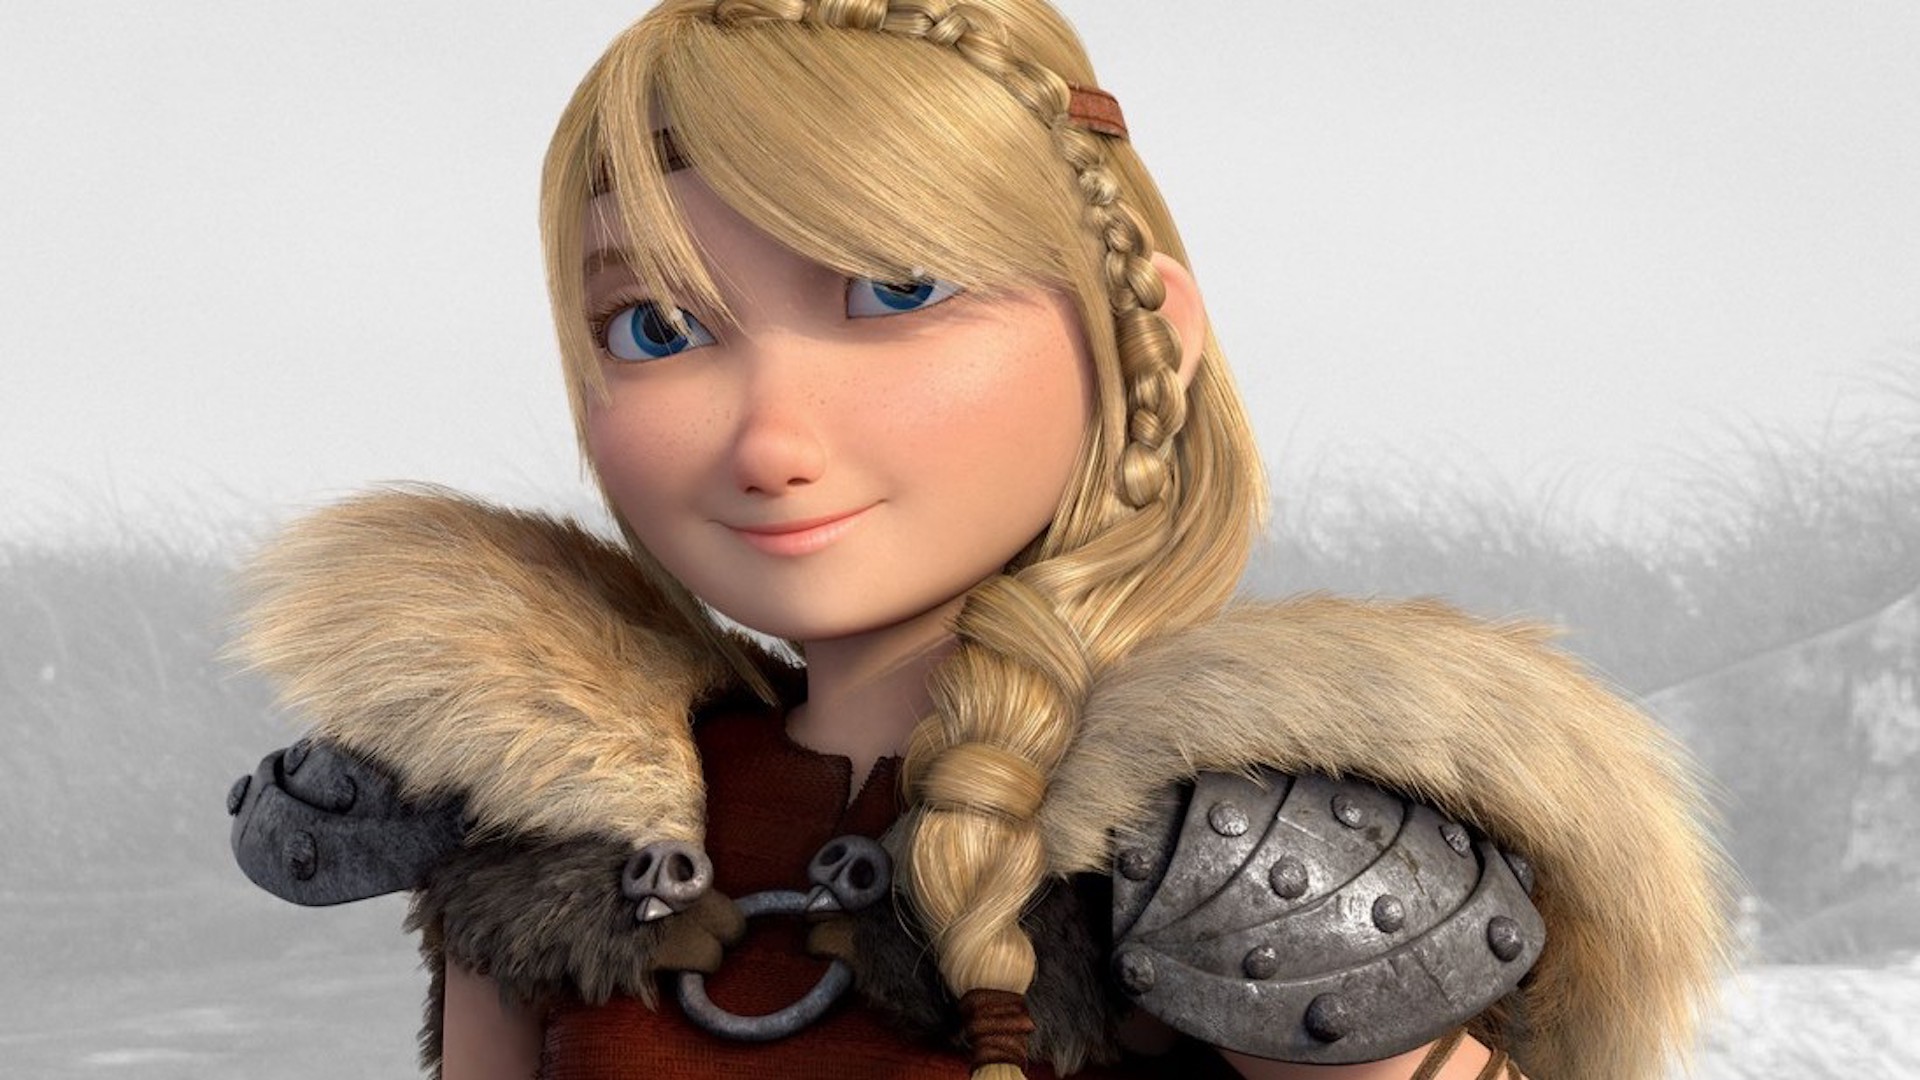 Hiccup's girlfriend